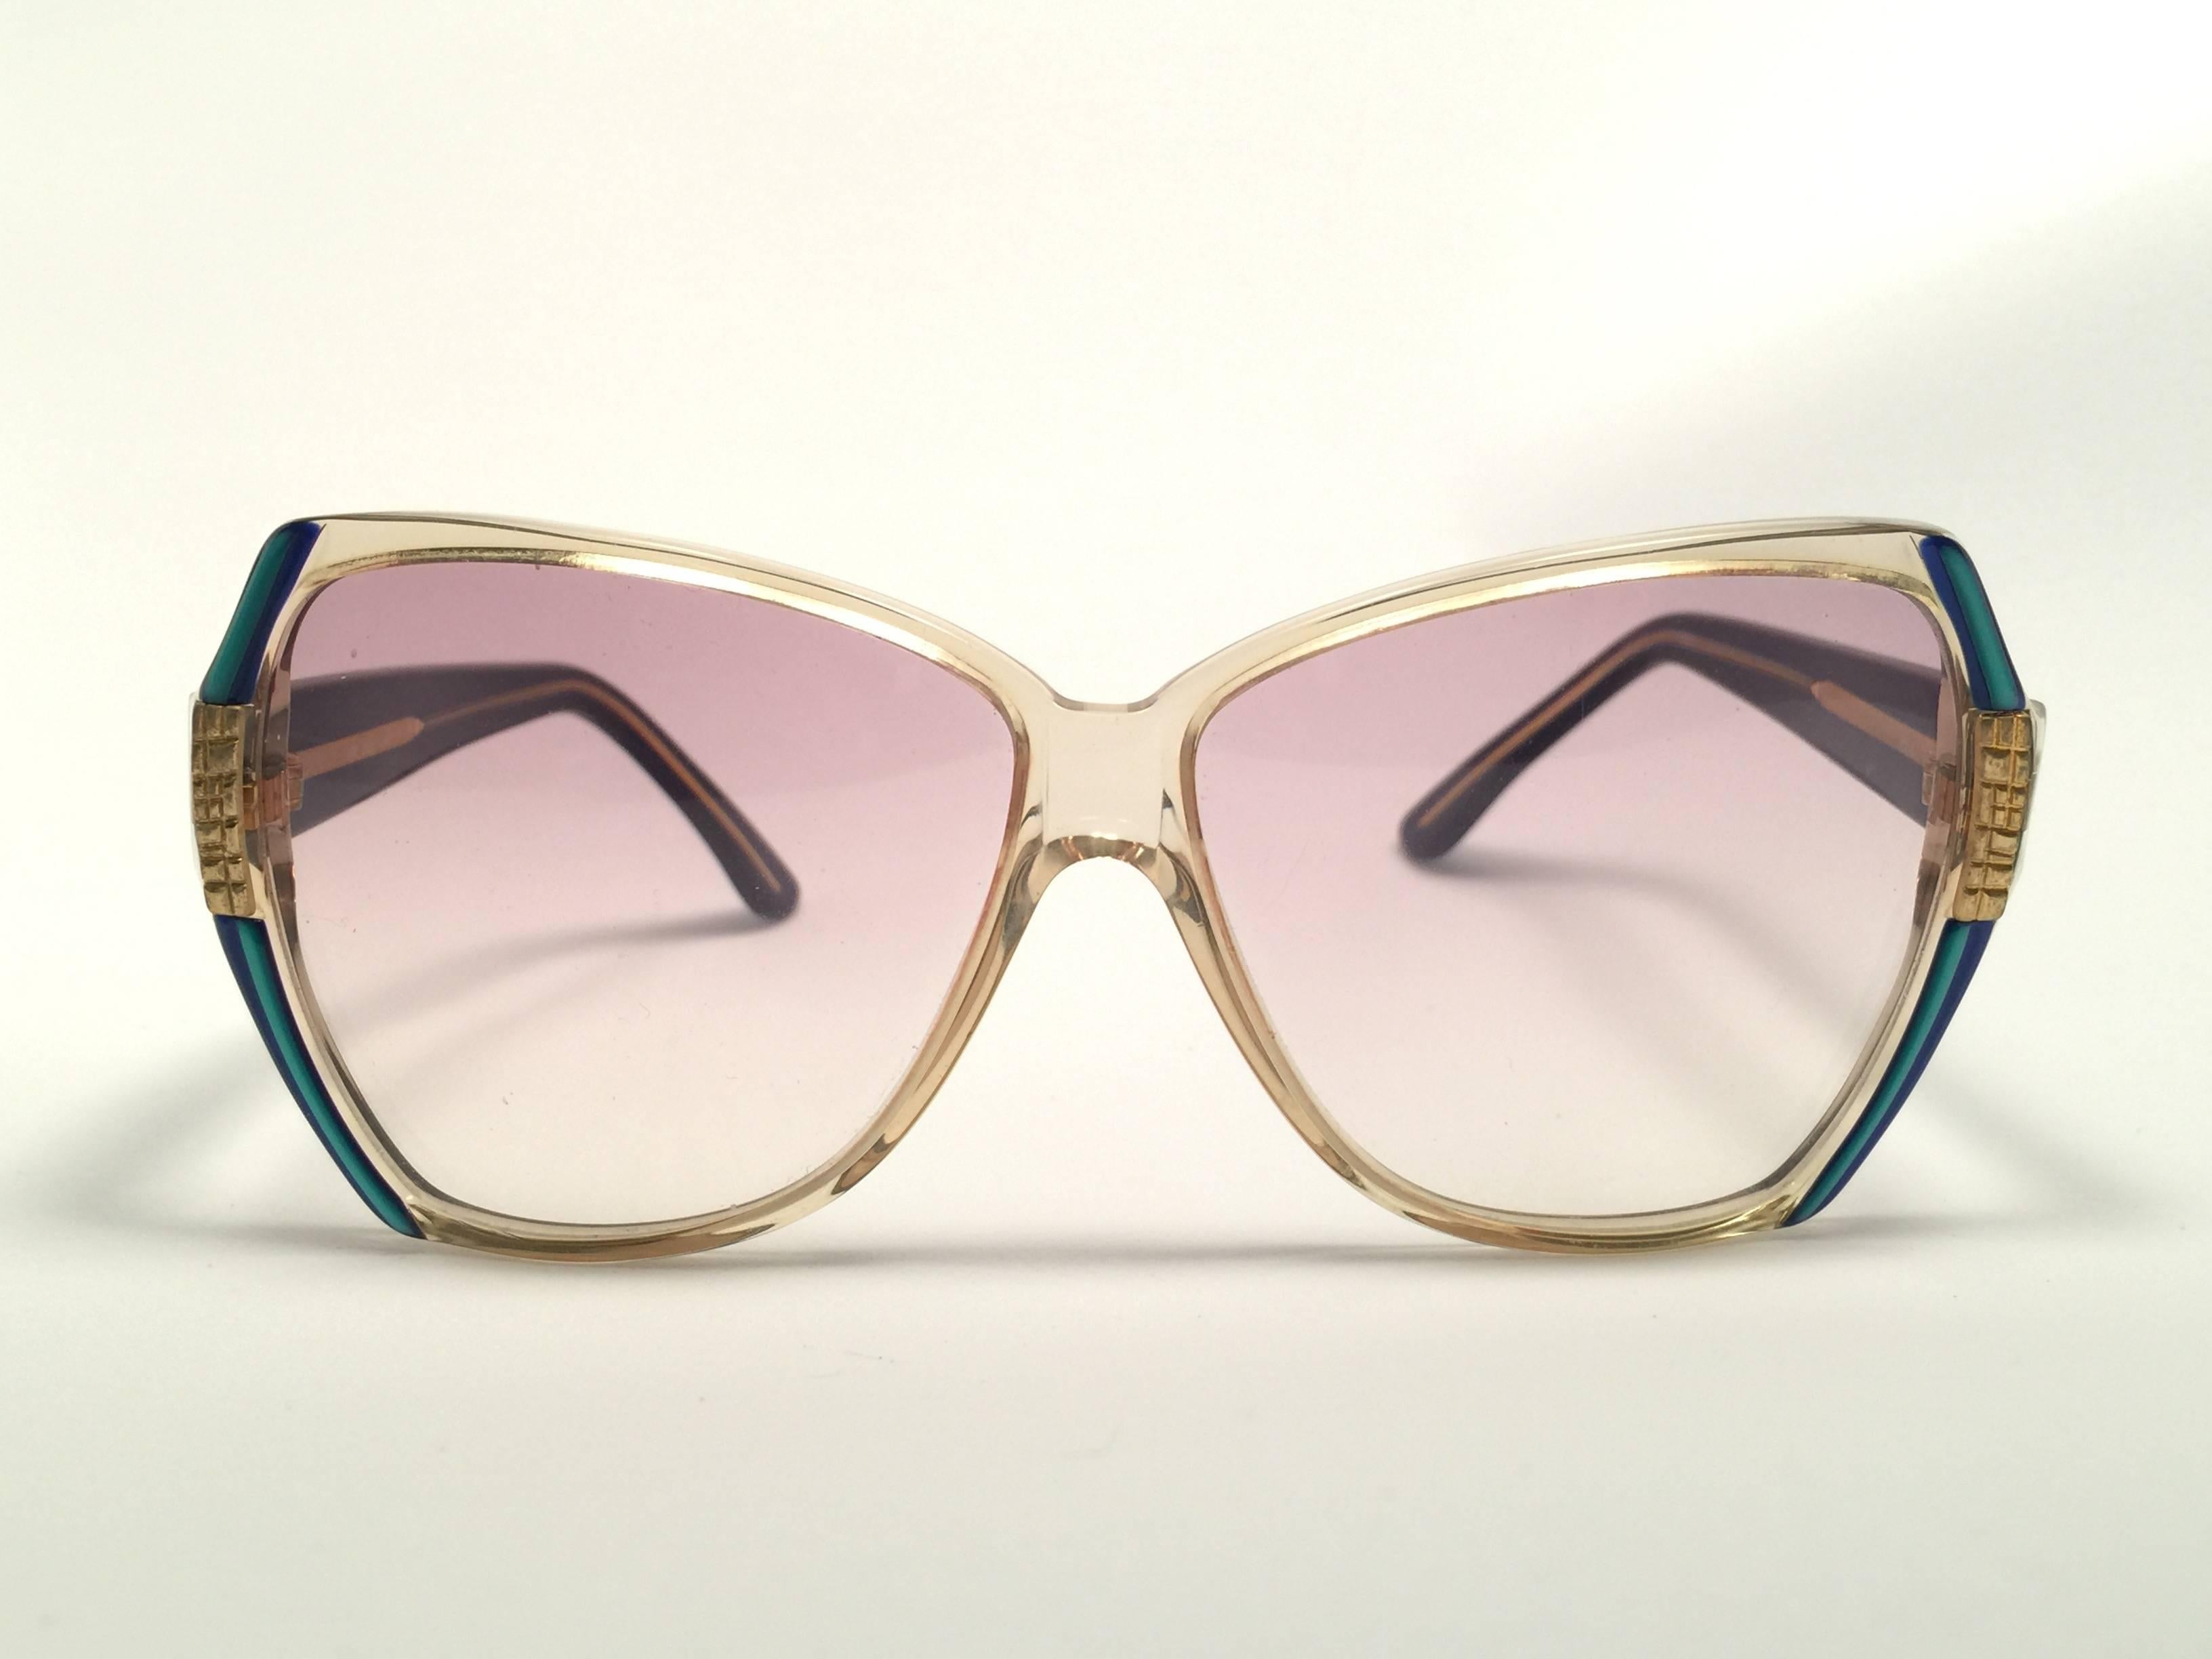 New Vintage Gucci translucent with turquoise and gold details frame. 
Spotless lenses.  
New never worn or displayed. This item could show minor sign of wear due to nearly 30 years of storage. Made in Italy.